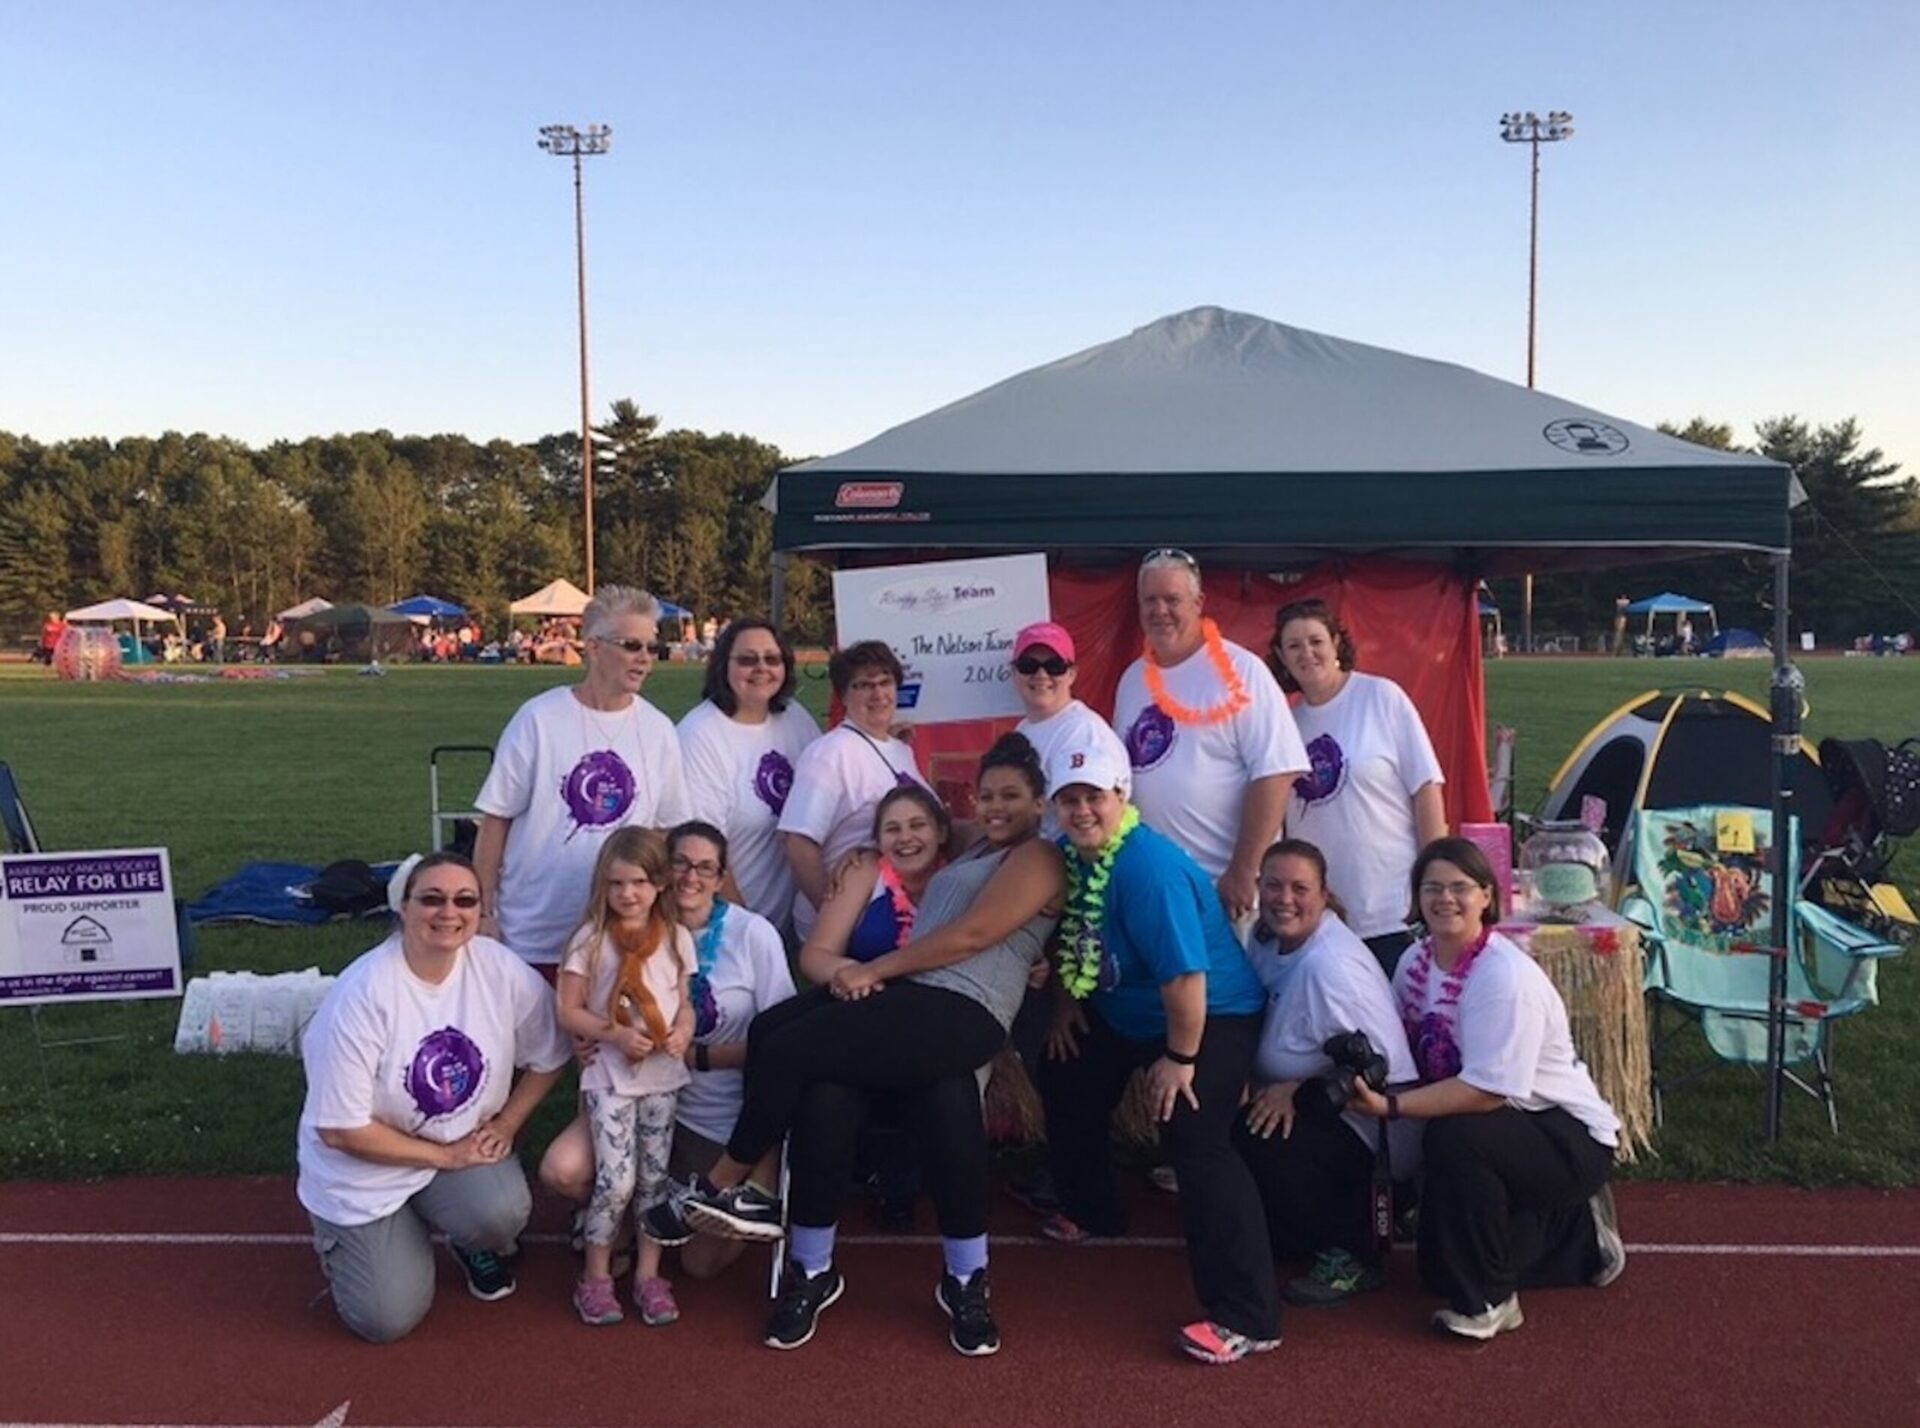 Jamie Nelson, in blue, with her team, The Nelson Team, at the 2016 Coventry Relay for Life at Coventry High School.